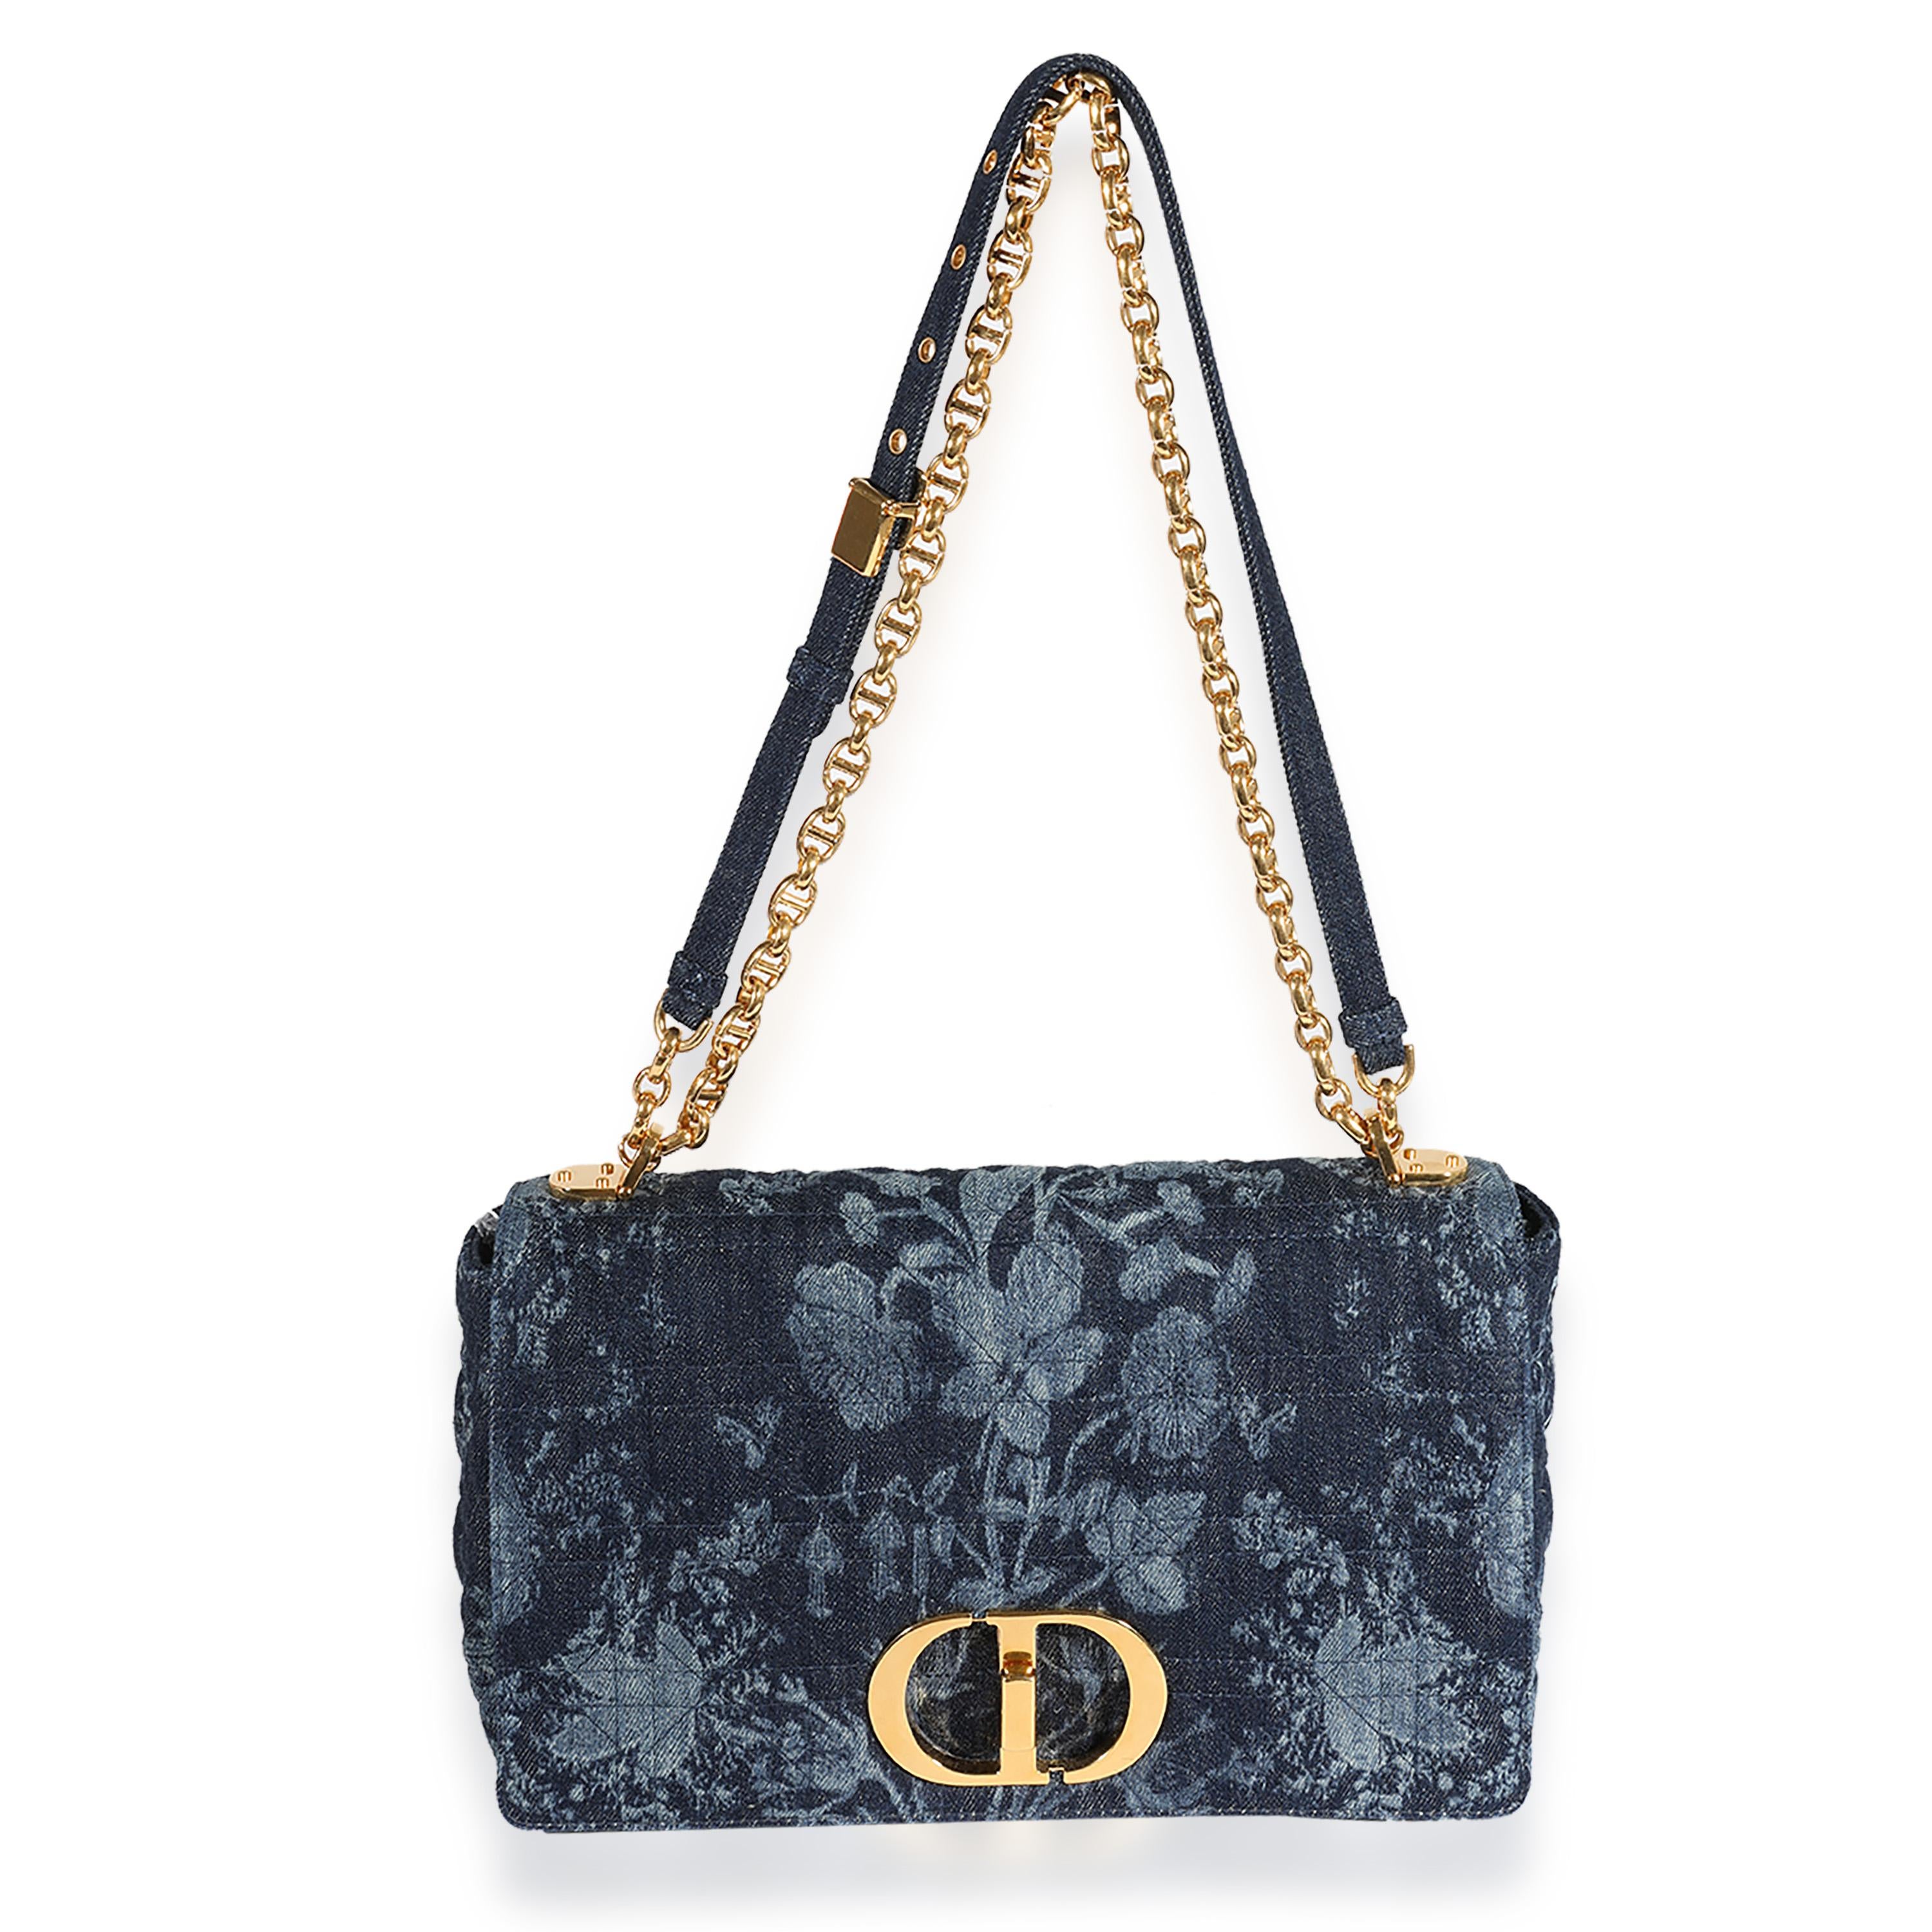 Listing Title: Dior Blue Floral Denim Large Caro Chain Bag
SKU: 123247
MSRP: 4700.00
Condition: Pre-owned 
Handbag Condition: Very Good
Condition Comments: Very Good Condition. Scratching to hardware. Mark at exterior base. Light discoloration